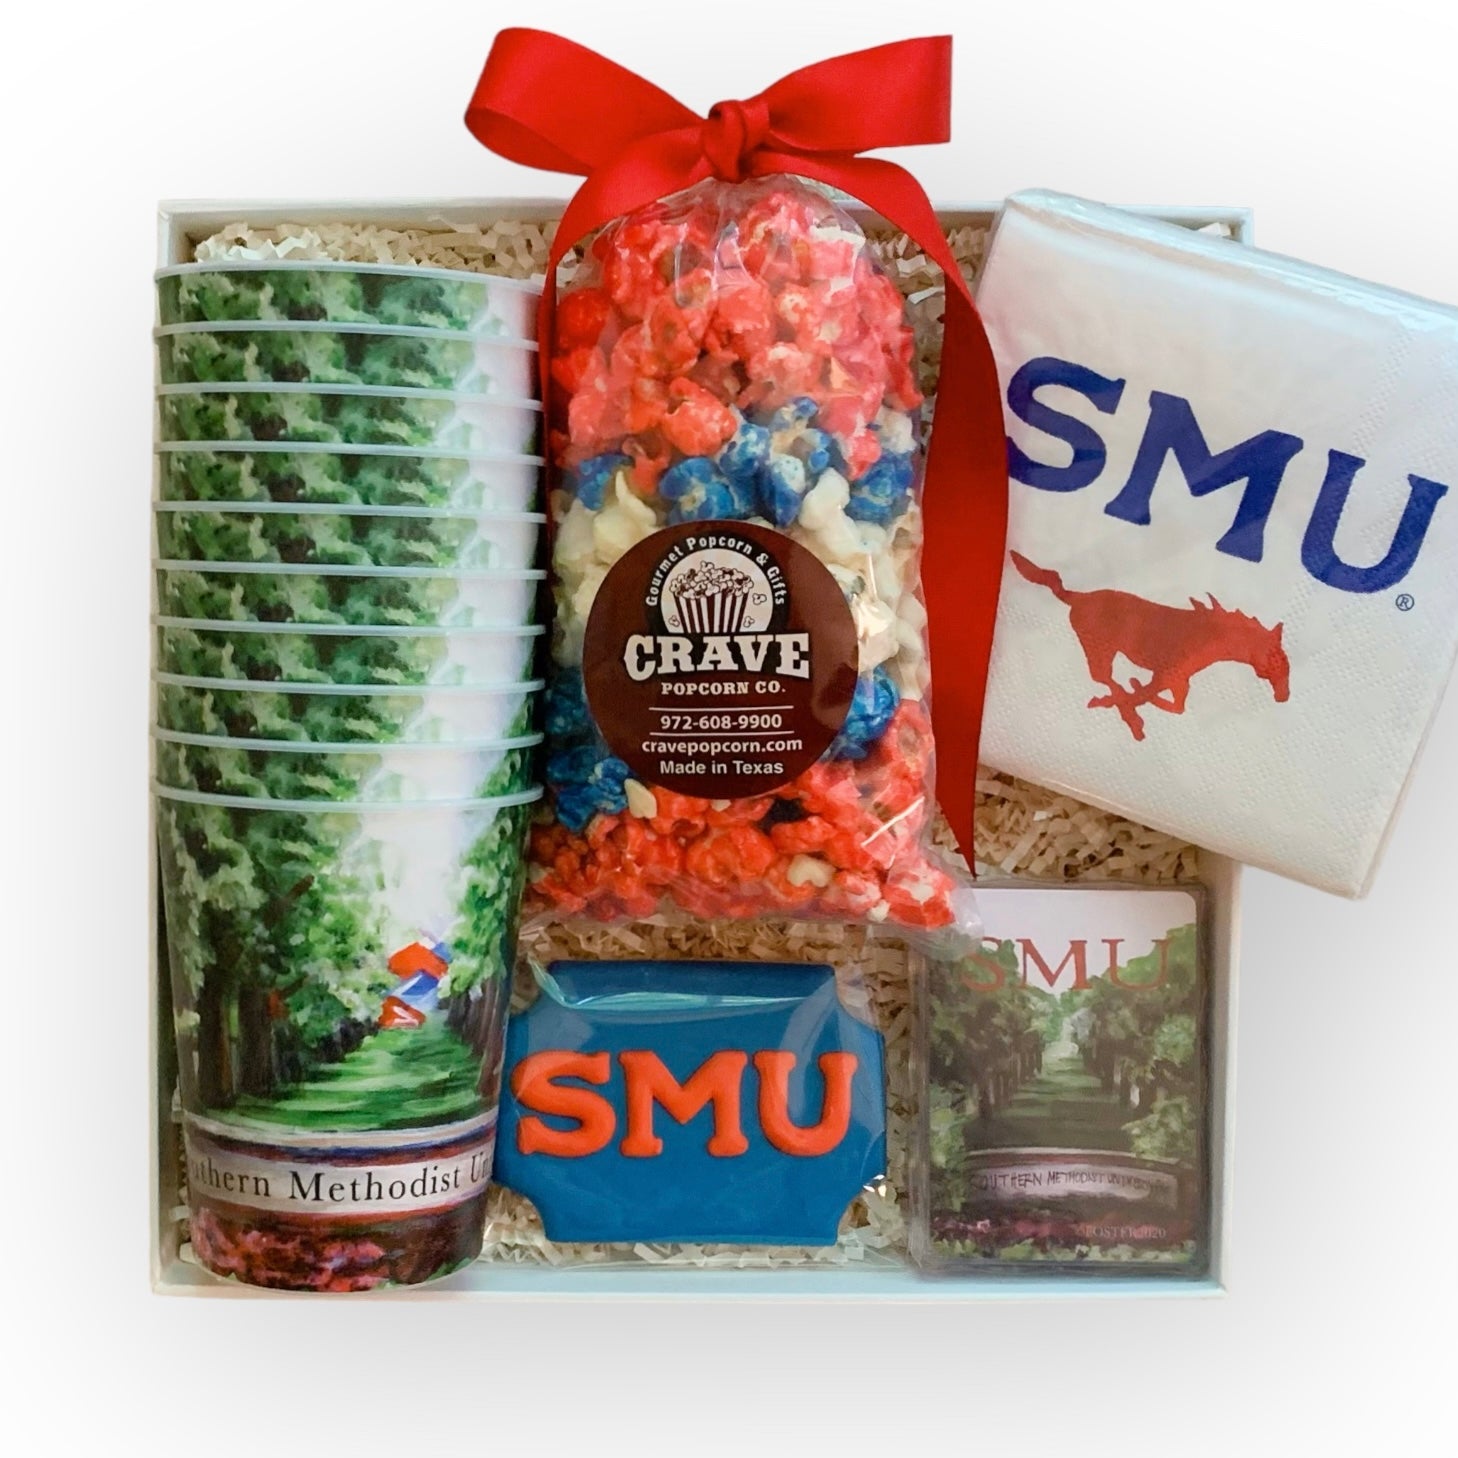 Gourmet Popcorn and Gifts